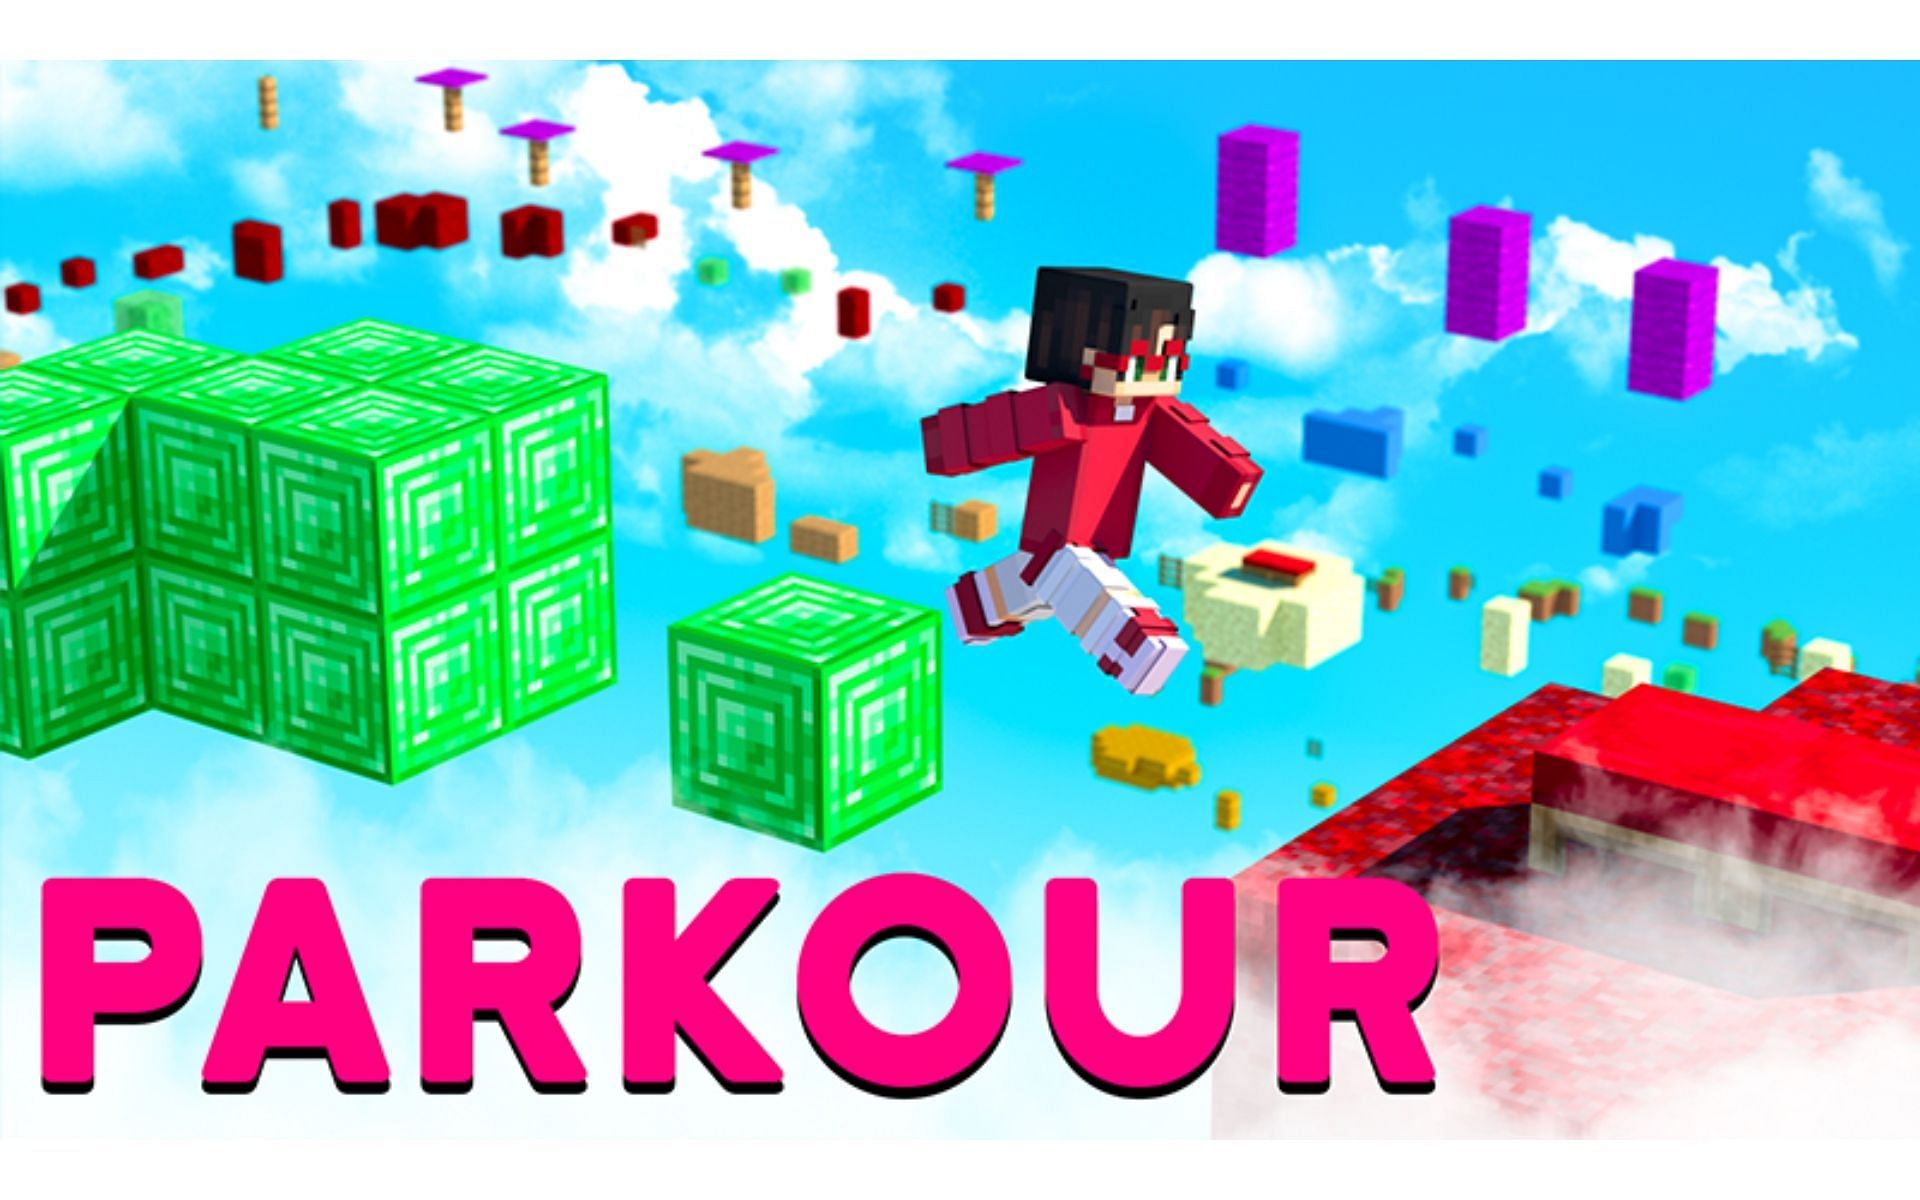 Being a parkour pro certainly has its perks (Image via Mojang)